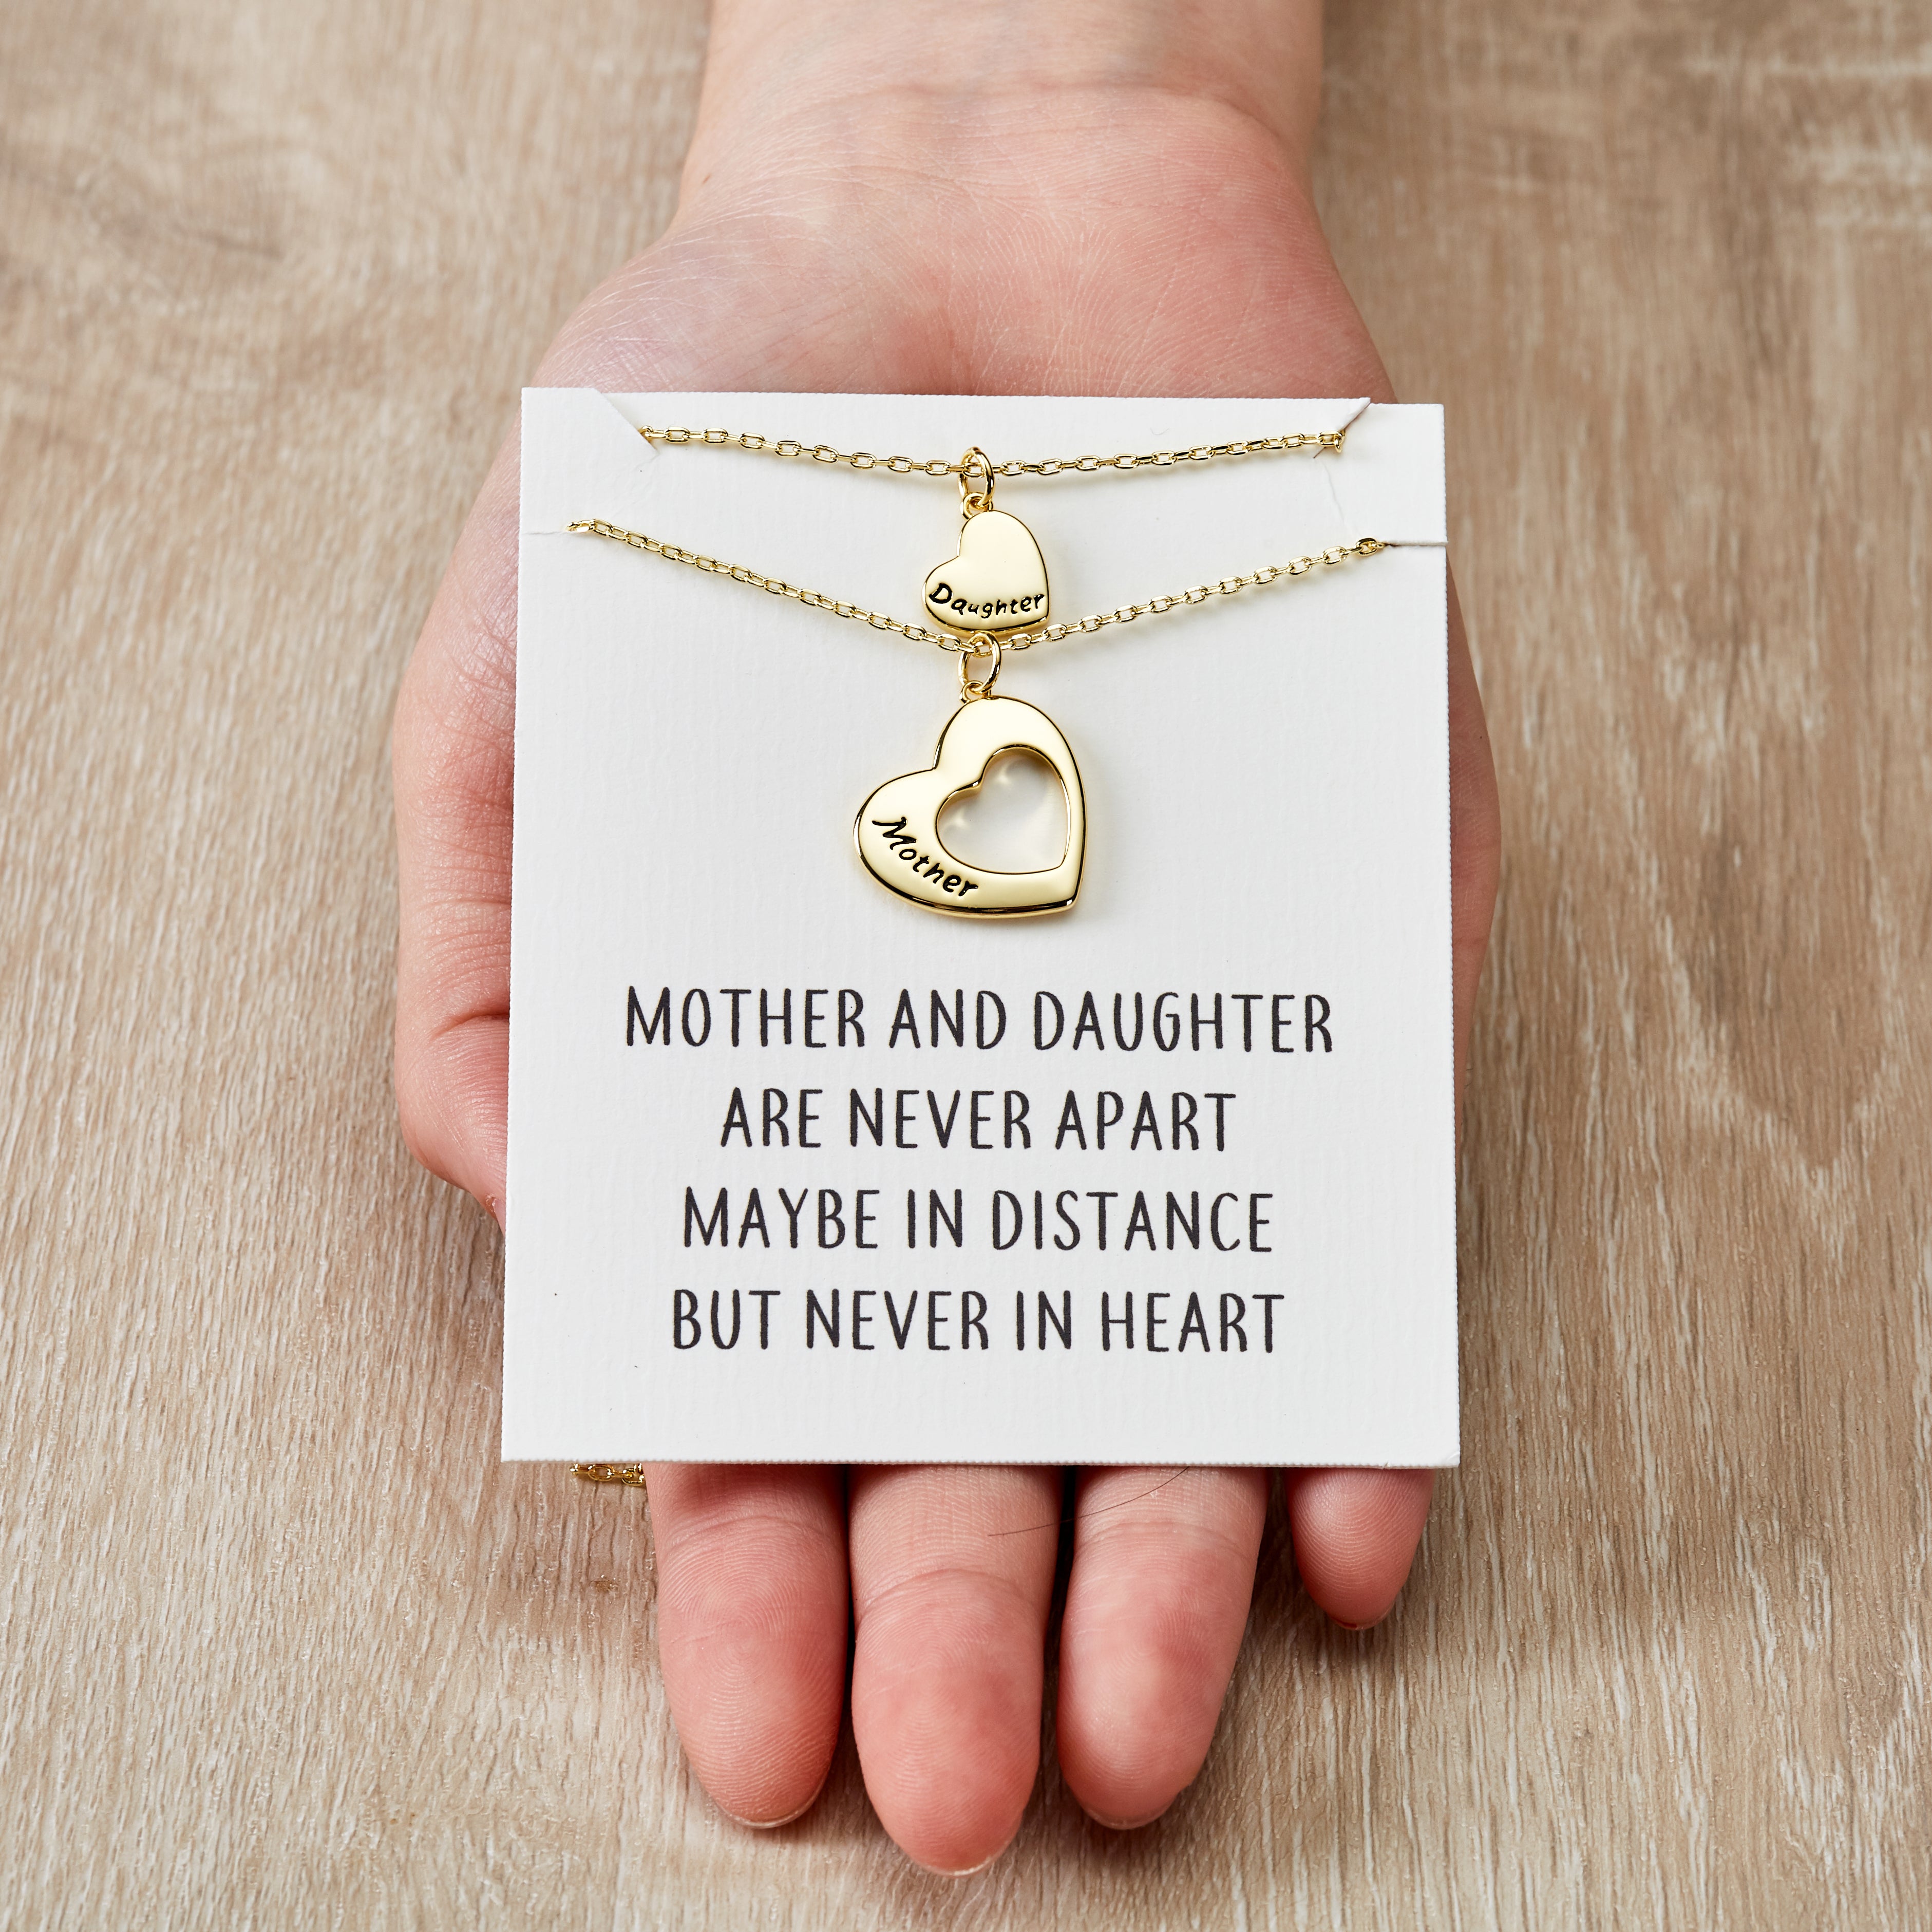 Gold Plated Mother and Daughter Necklace Set with Quote Card